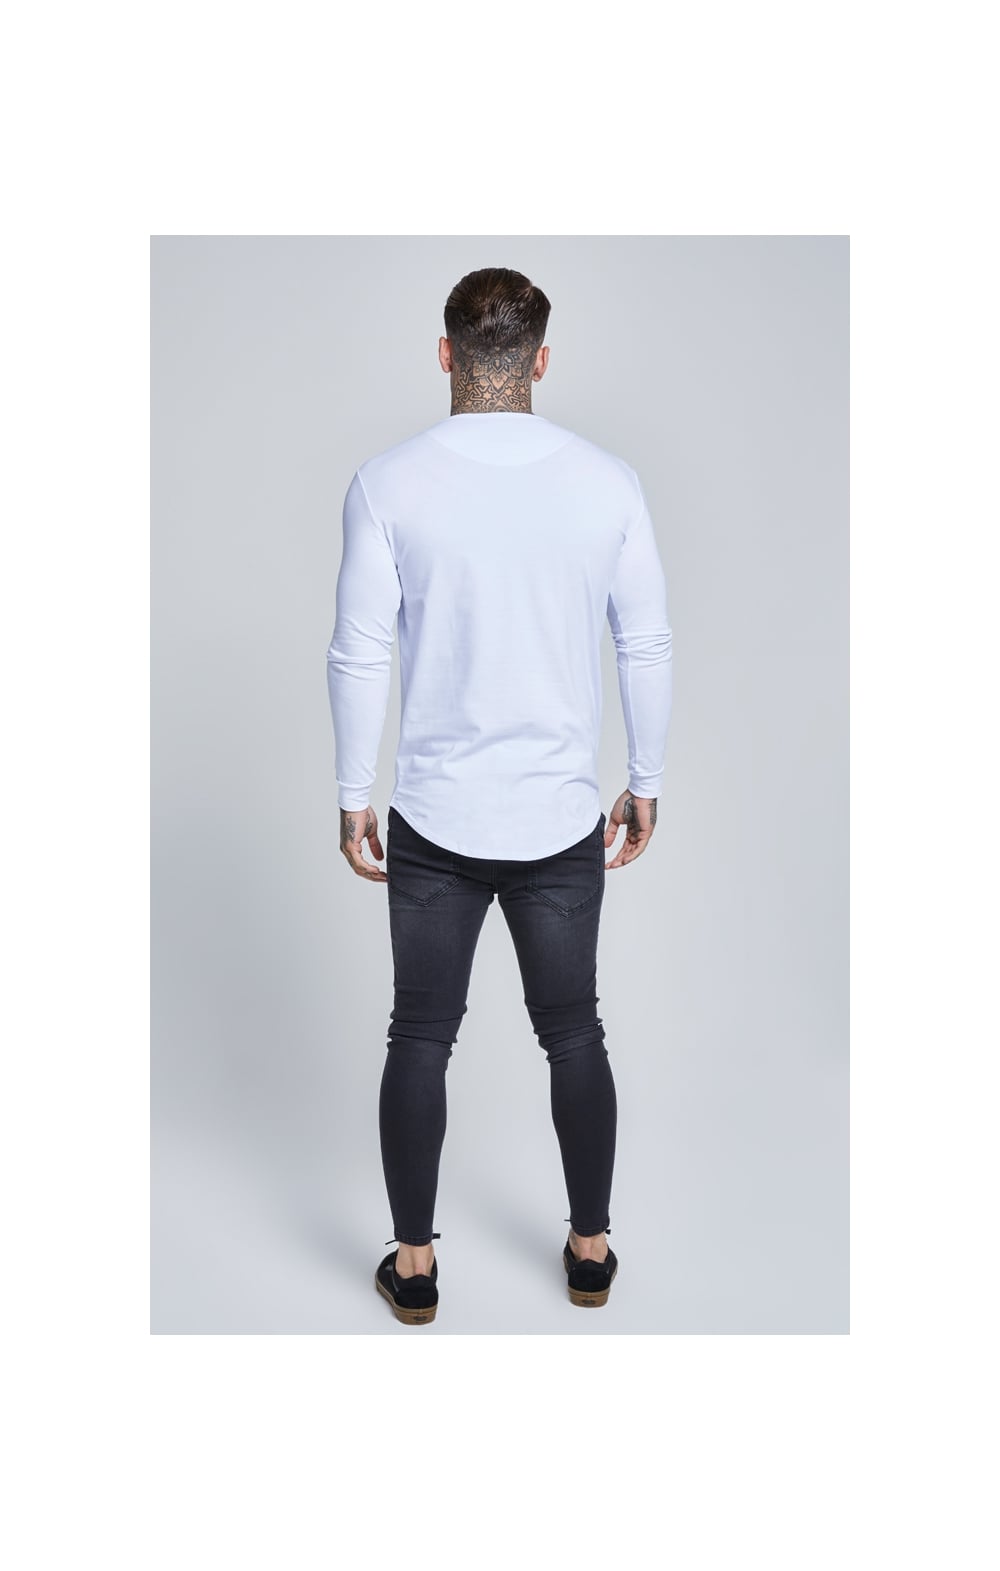 White Long Sleeve Muscle Fit T-Shirt (4)